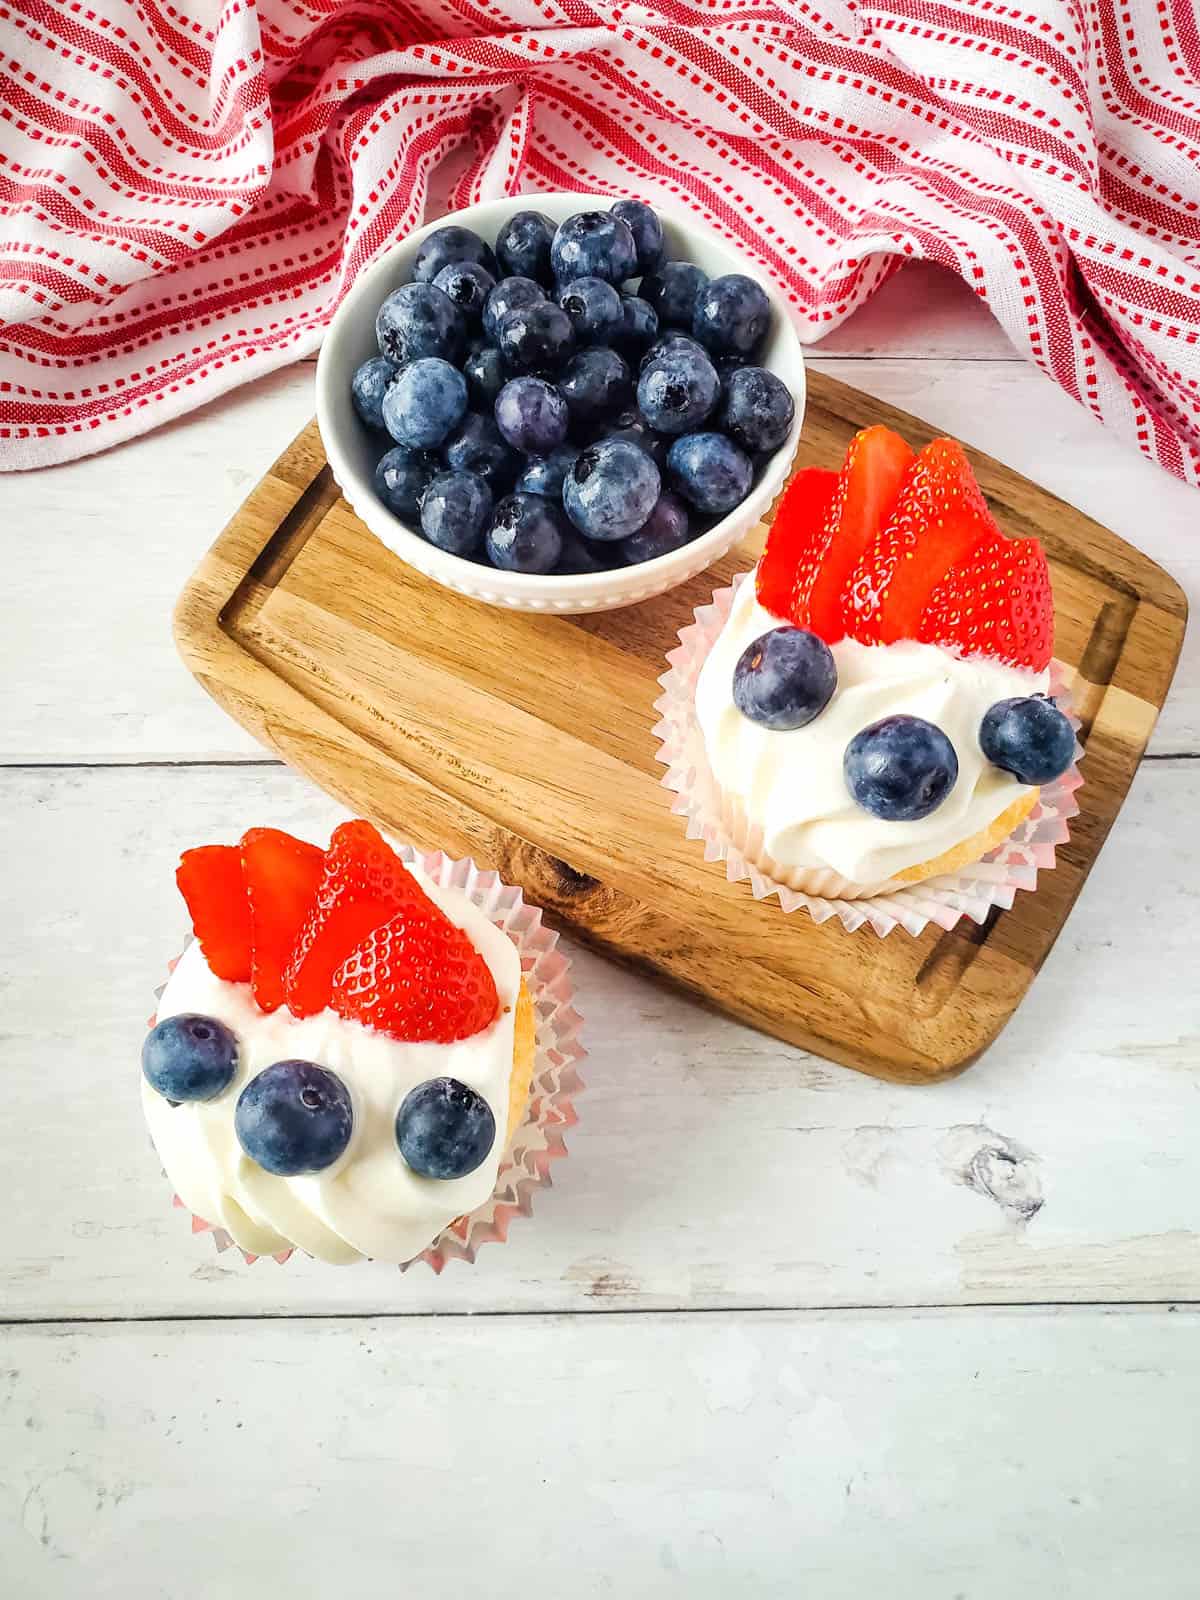 Red white and blue cupcakes that are patriotic and perfect for Memorial Day or 4th of July.